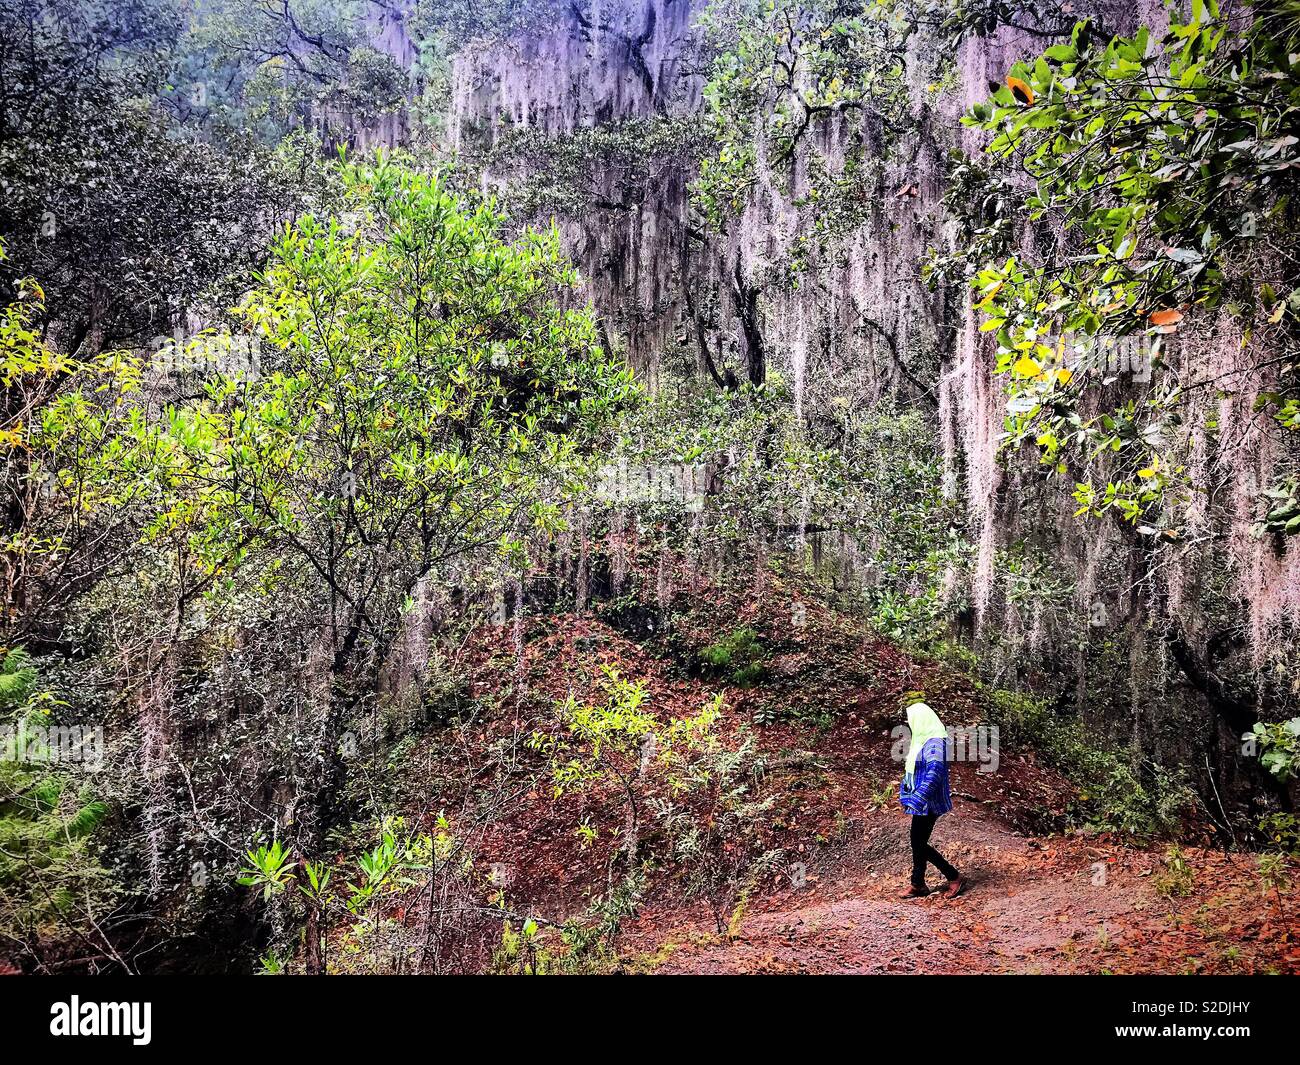 A Mexican tourist walks in a forest in Lachatao, in the Sierra Madre de Oaxaca, Mexico Stock Photo